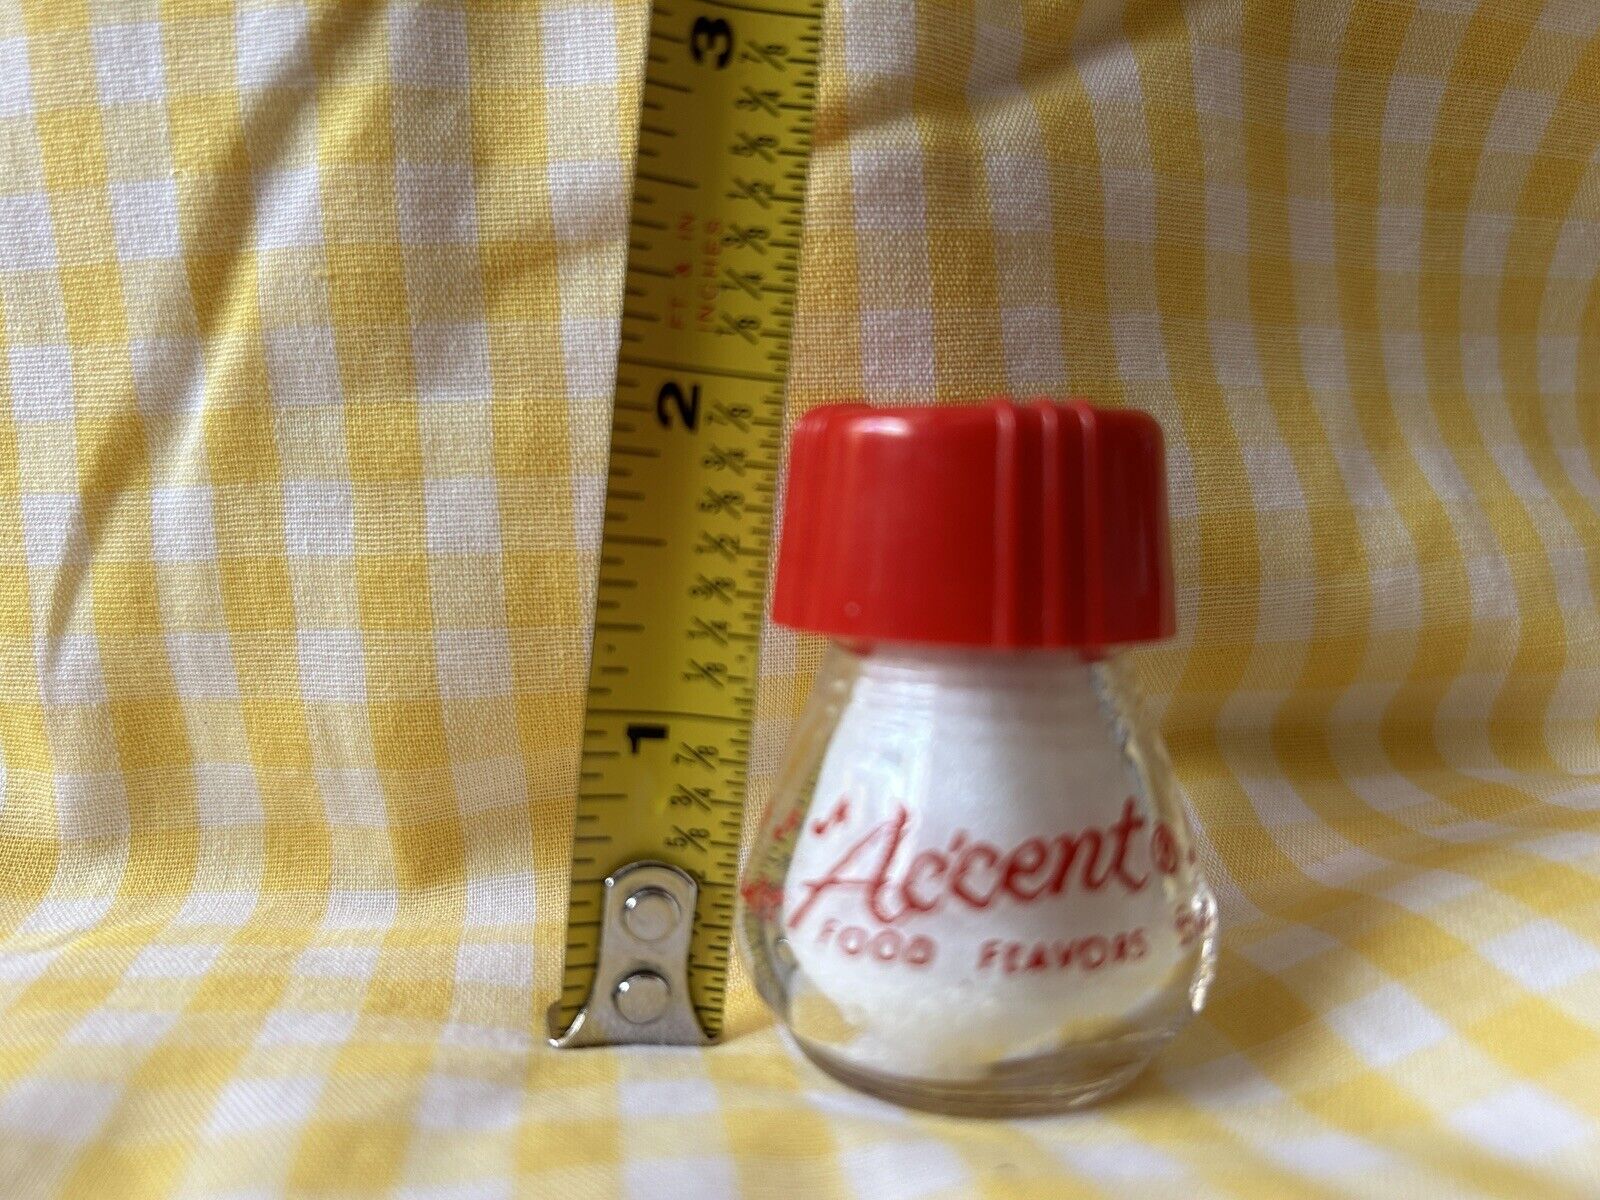 Vintage Ac’cent MSG “Accent Makes Food Flavors Sing” Glass Shaker 